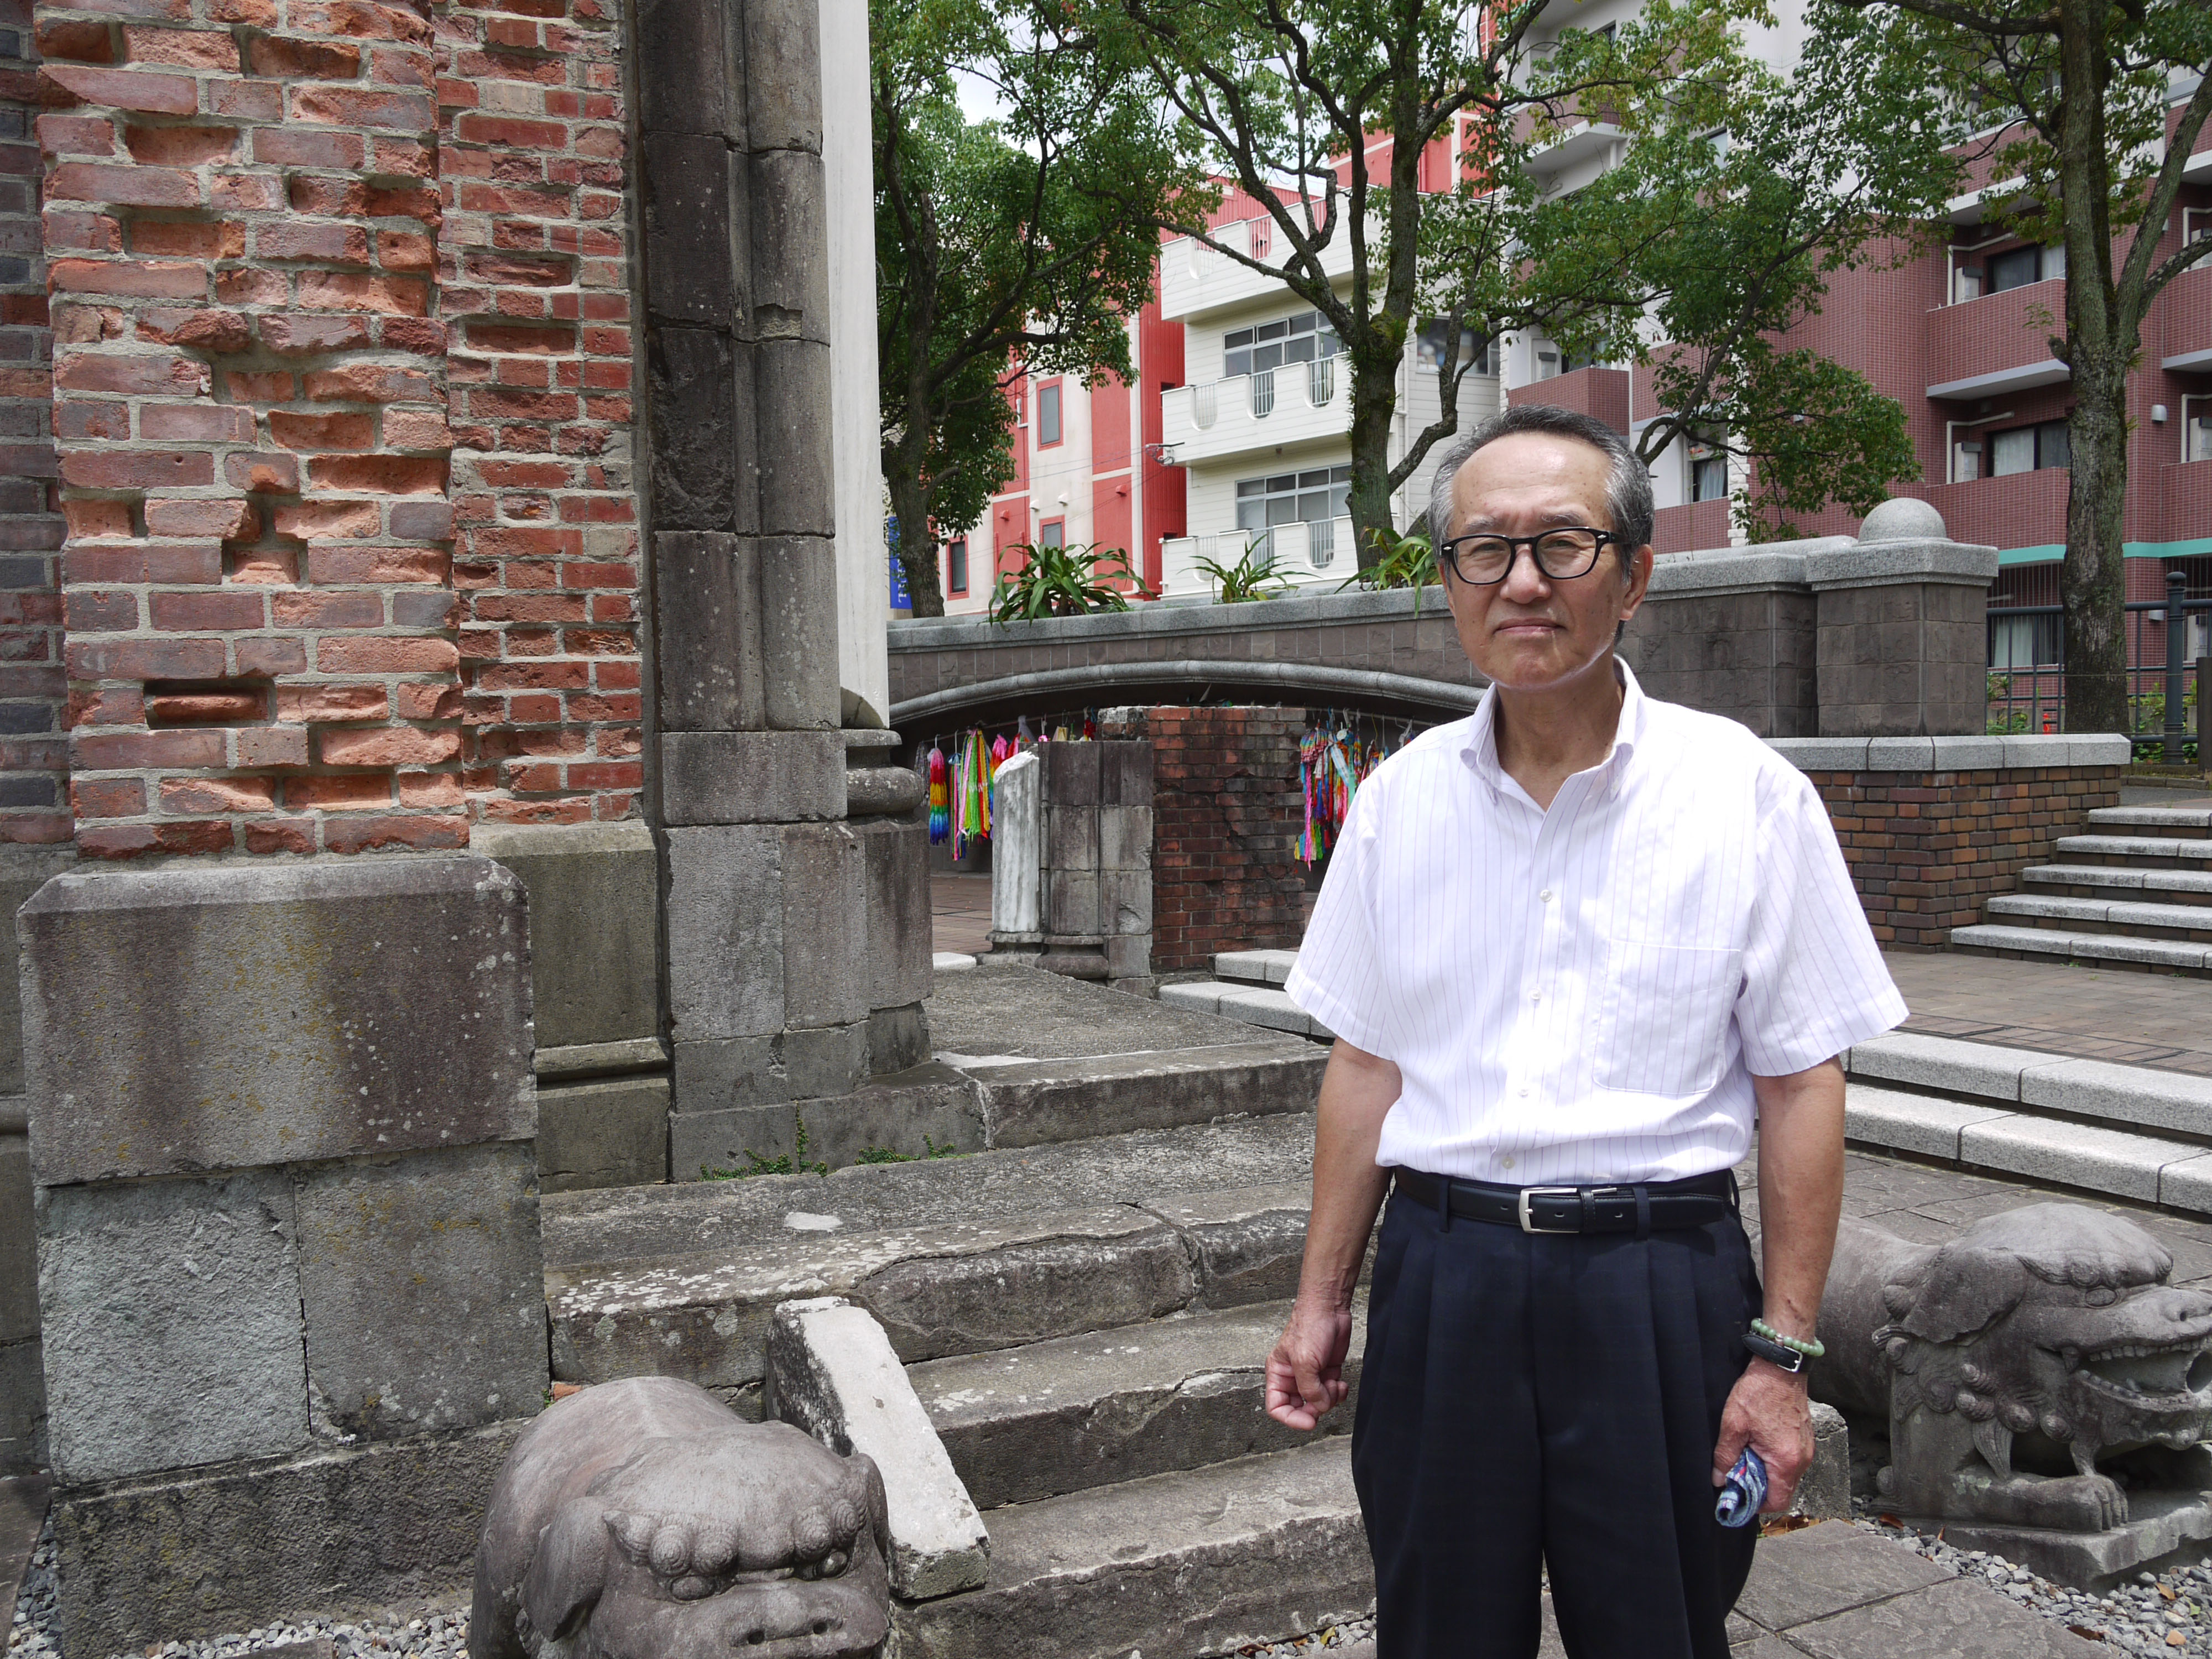 Shigeyuki Anan poses on July 29 in front of bricks that used to be part of Urakami Cathedral in the city of Nagasaki, which was ruined by the 'Fat Man' plutonium bomb 70 years ago. | TOMOKO OTAKE